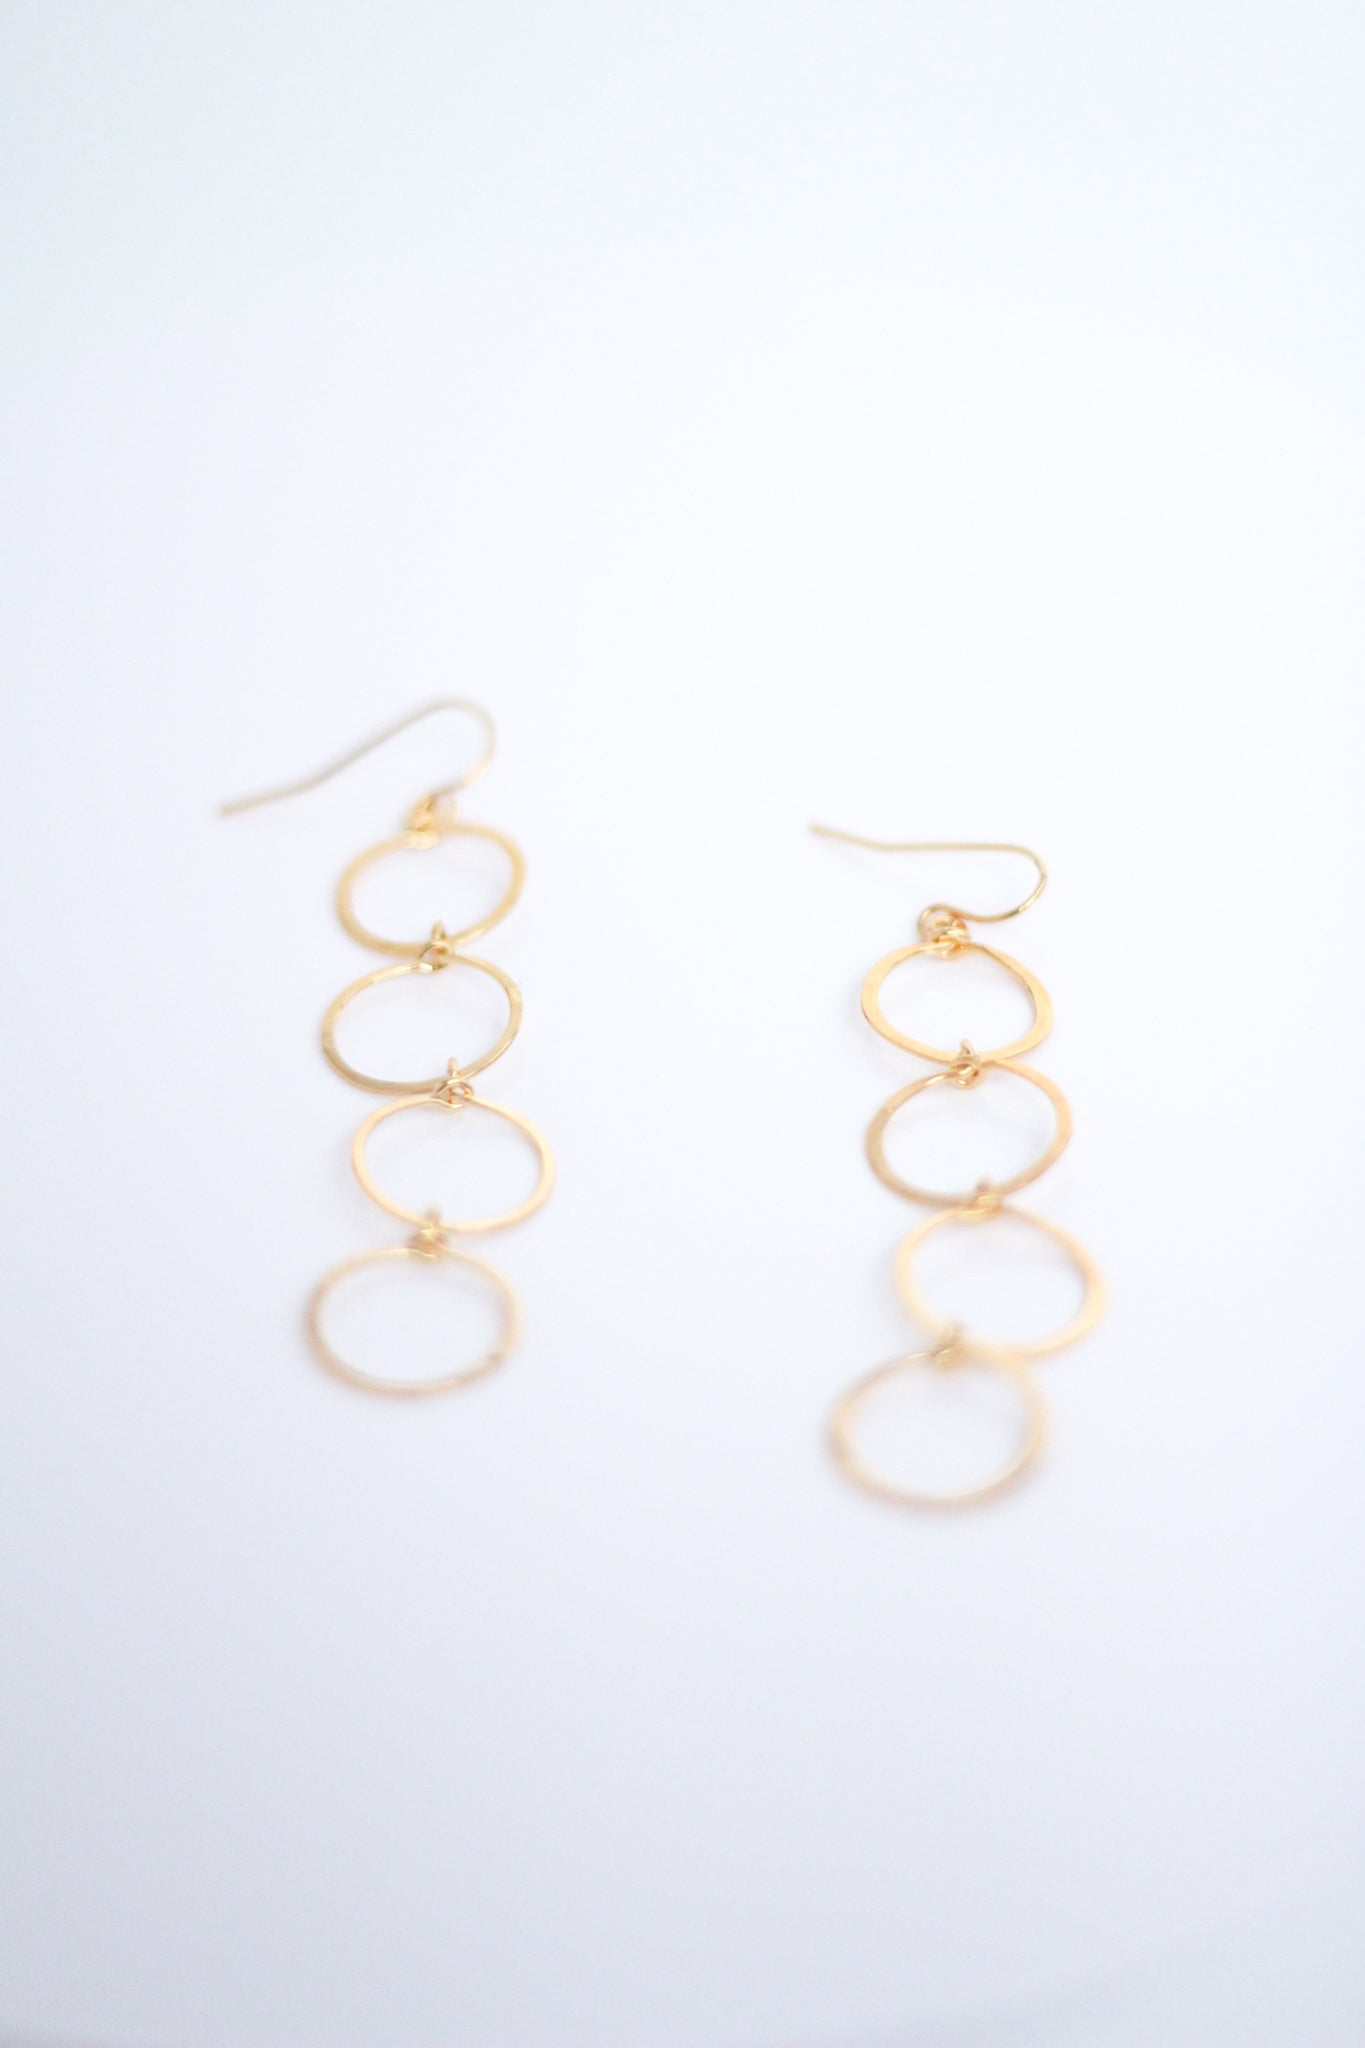 Hammered Small Circle Drop Earrings. 14K gold plated. At Kadou Boutique. Free shipping.